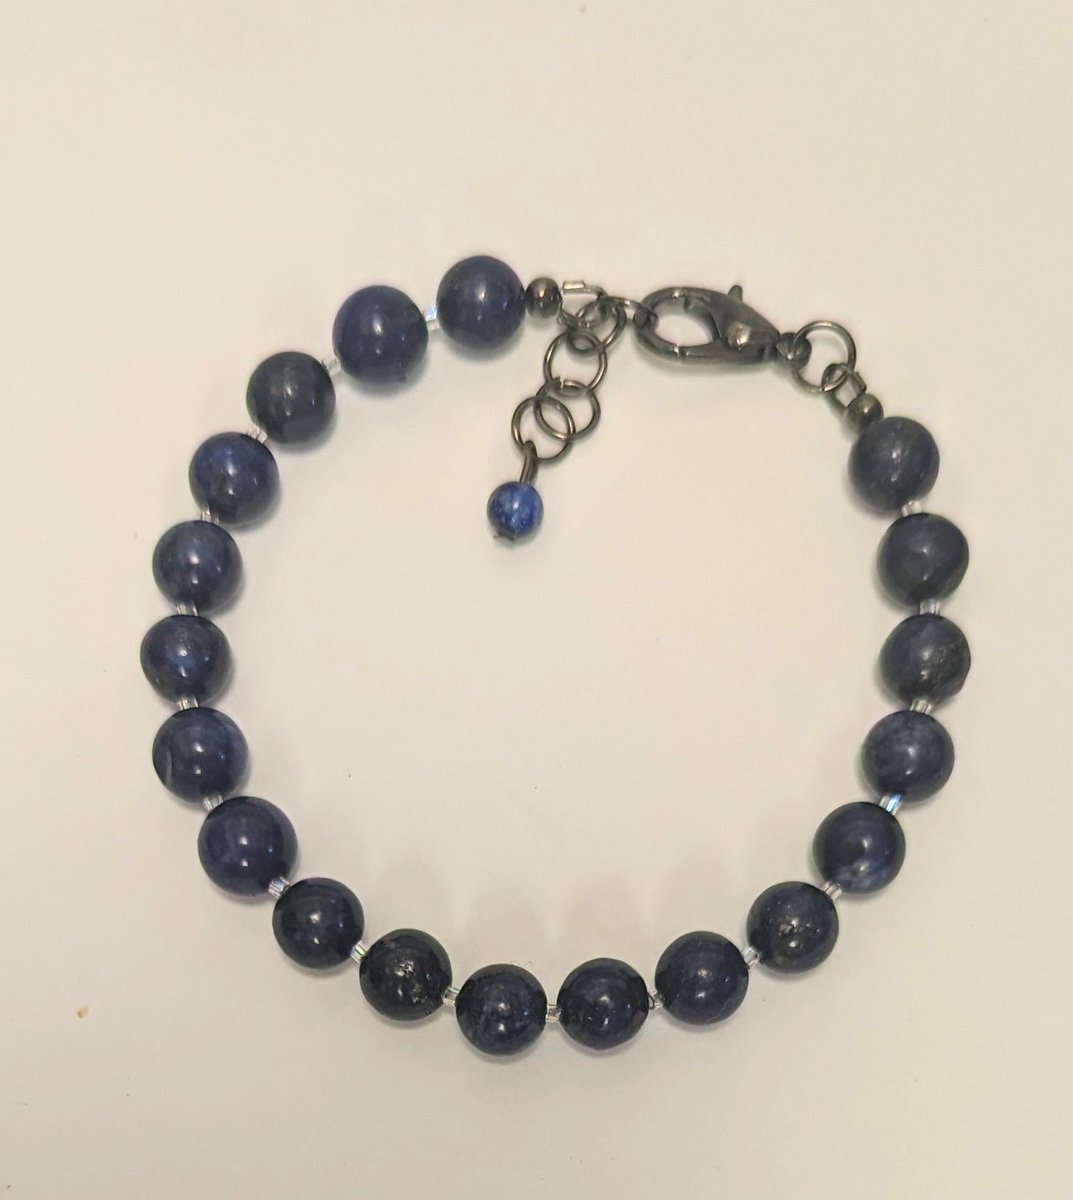 $20.00
Lapis lazuli bracelet with clasp.
I do crafts as therapy and also to supplement my ODSP income.